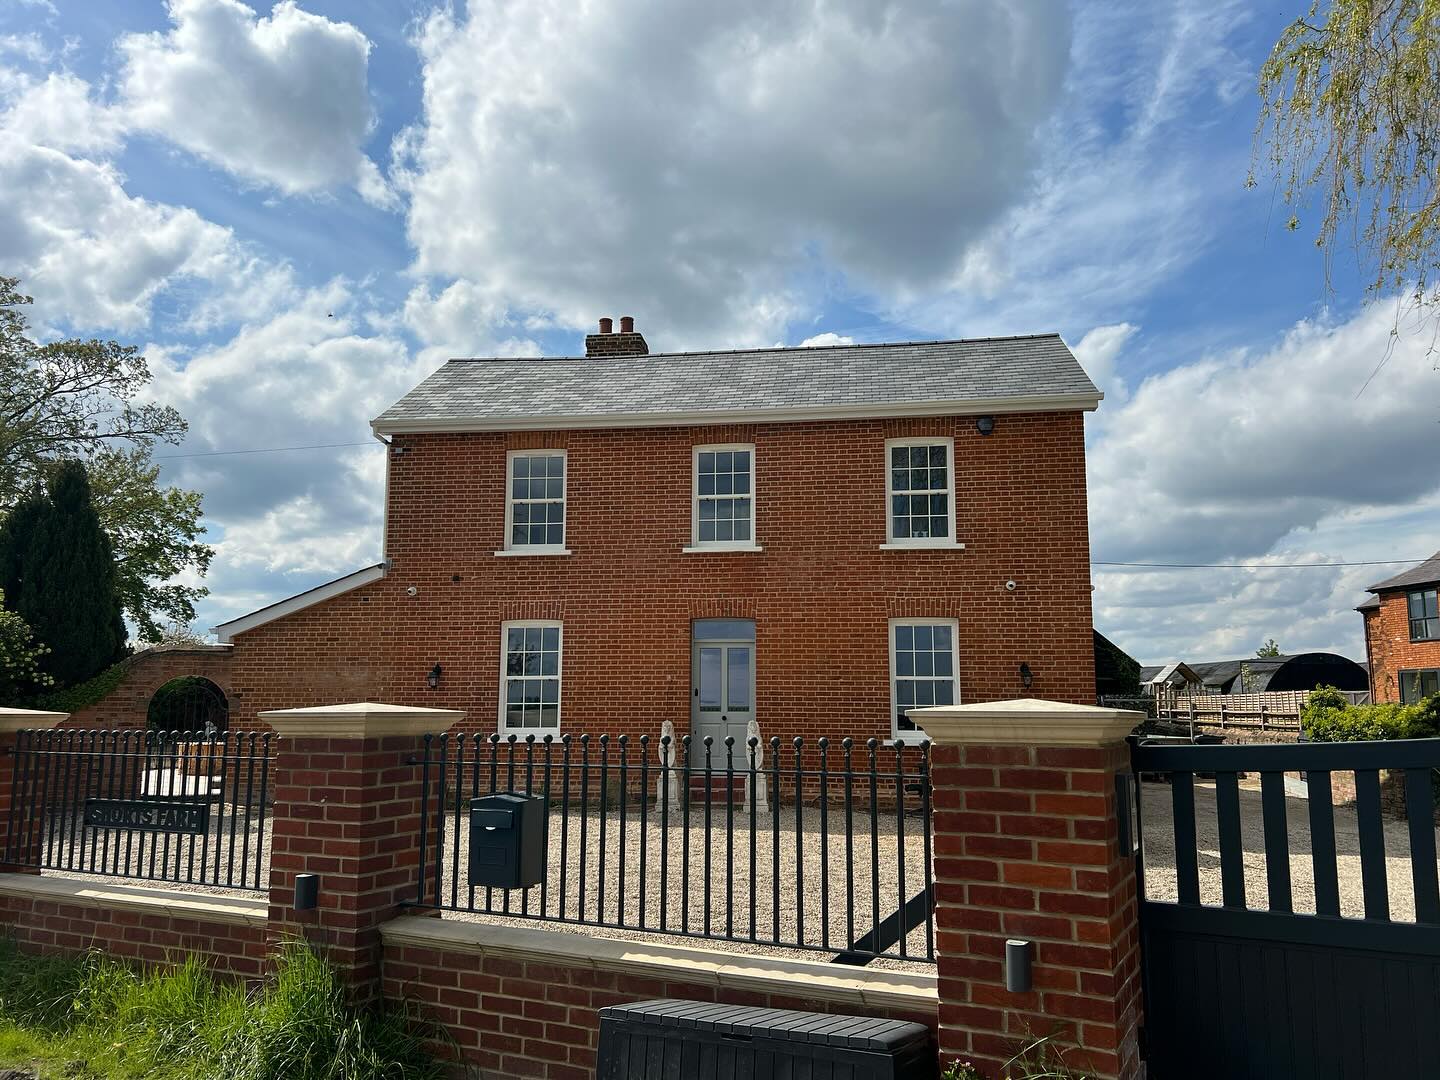 We handed this beautiful farmhouse back to our clients just over a week ago. We have absolutely loved extending, renovating and bringing this old farmhouse back to life. an old classic ready for the next 100 years. Great work by all involved. 👏🏼👷🏻‍♂️⚒️ 🏡. #farmhousestyle #newhome #home #house #farmhousedecor #essexmums #essexarchitects #essexcounty #homesweethome #brentwood #shenfield #chelmsford #kitchen #bathroom #luckandfullerbathrooms #brentwoodkitchenandinteriors #rpmcwilliams #homeinterior #homeinspiration #houserenovation #renovations